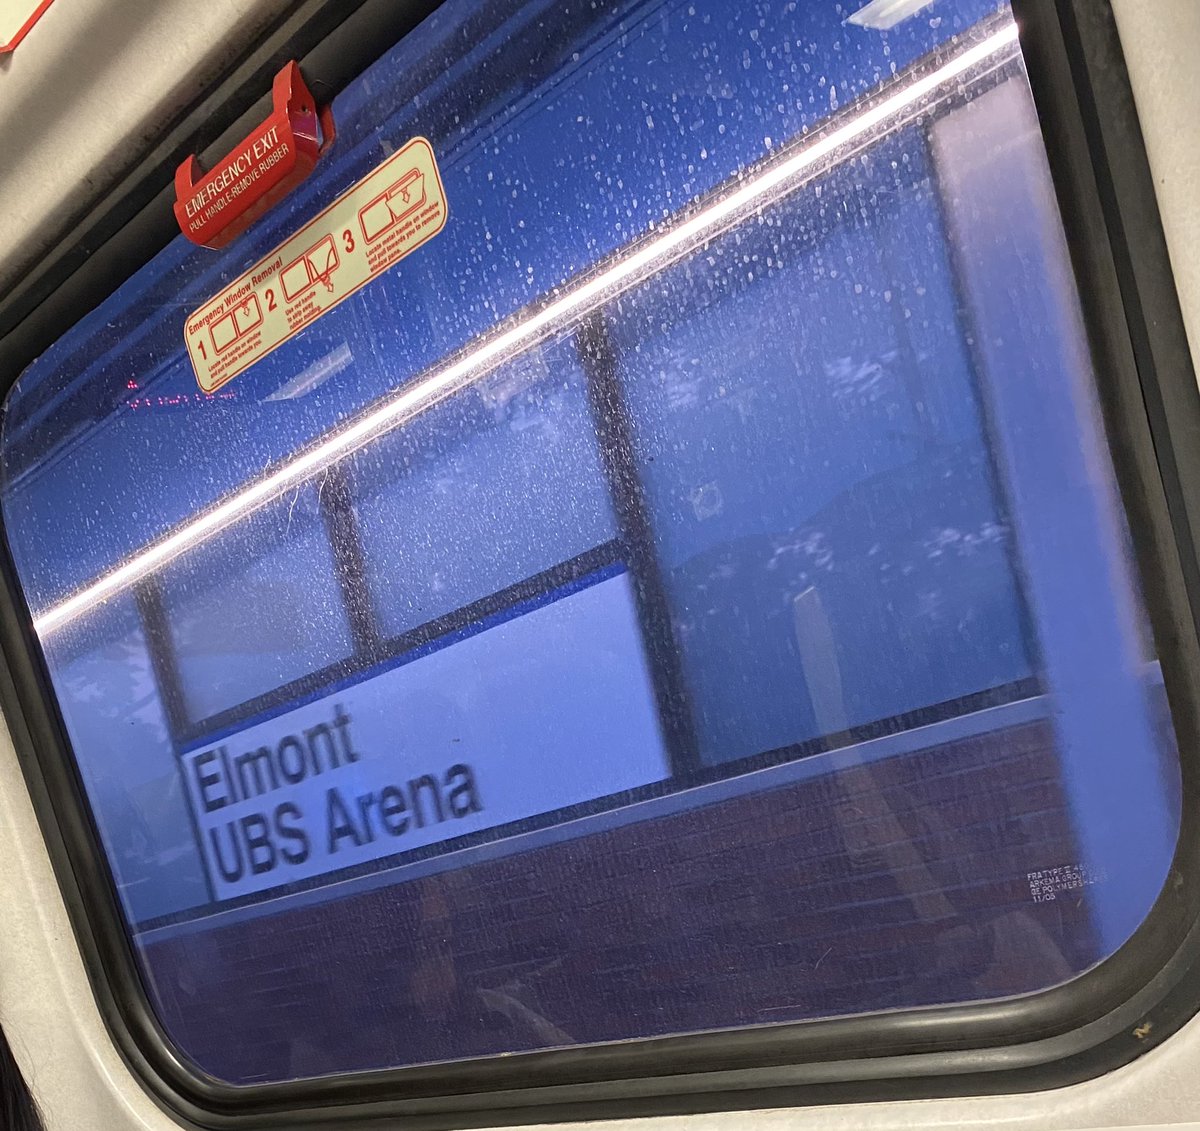 i’ve never stopped at this station on the train so when the overhead said “ubs arena” i jumped in my seat
(what was it namjoon said about not forgetting them?)
(yoongi i love u)